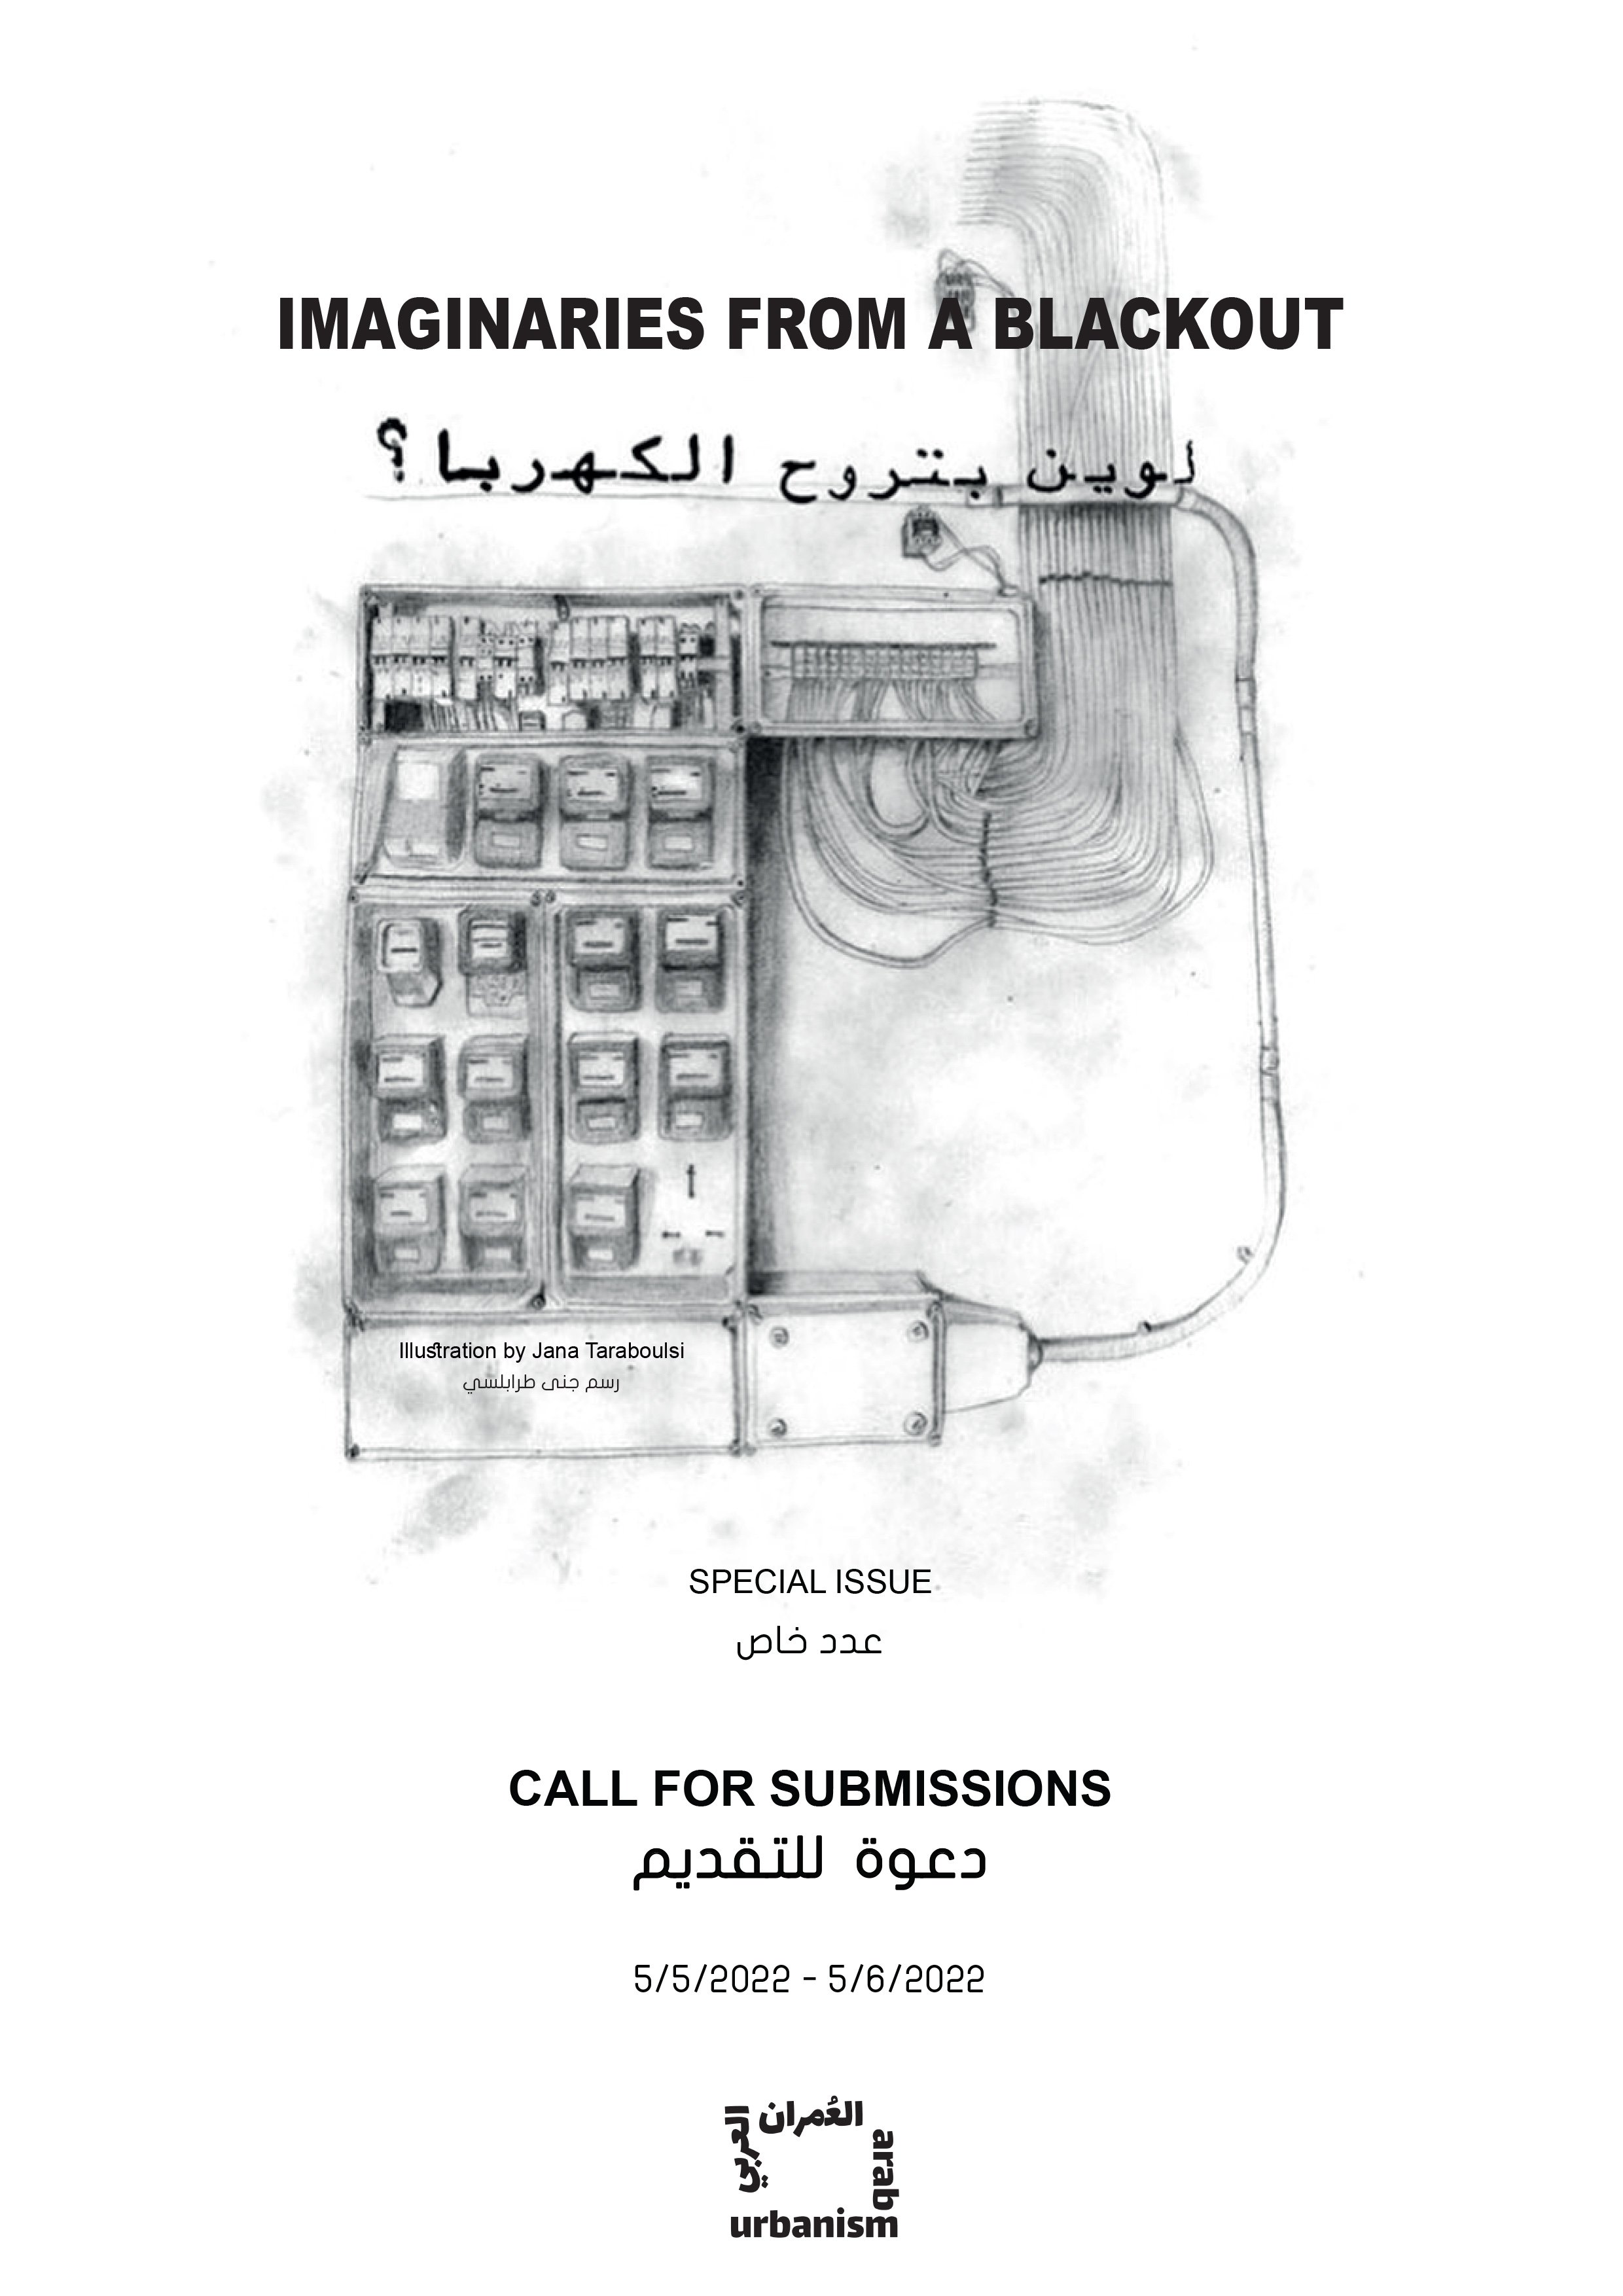 Special issue call-Cover.jpg